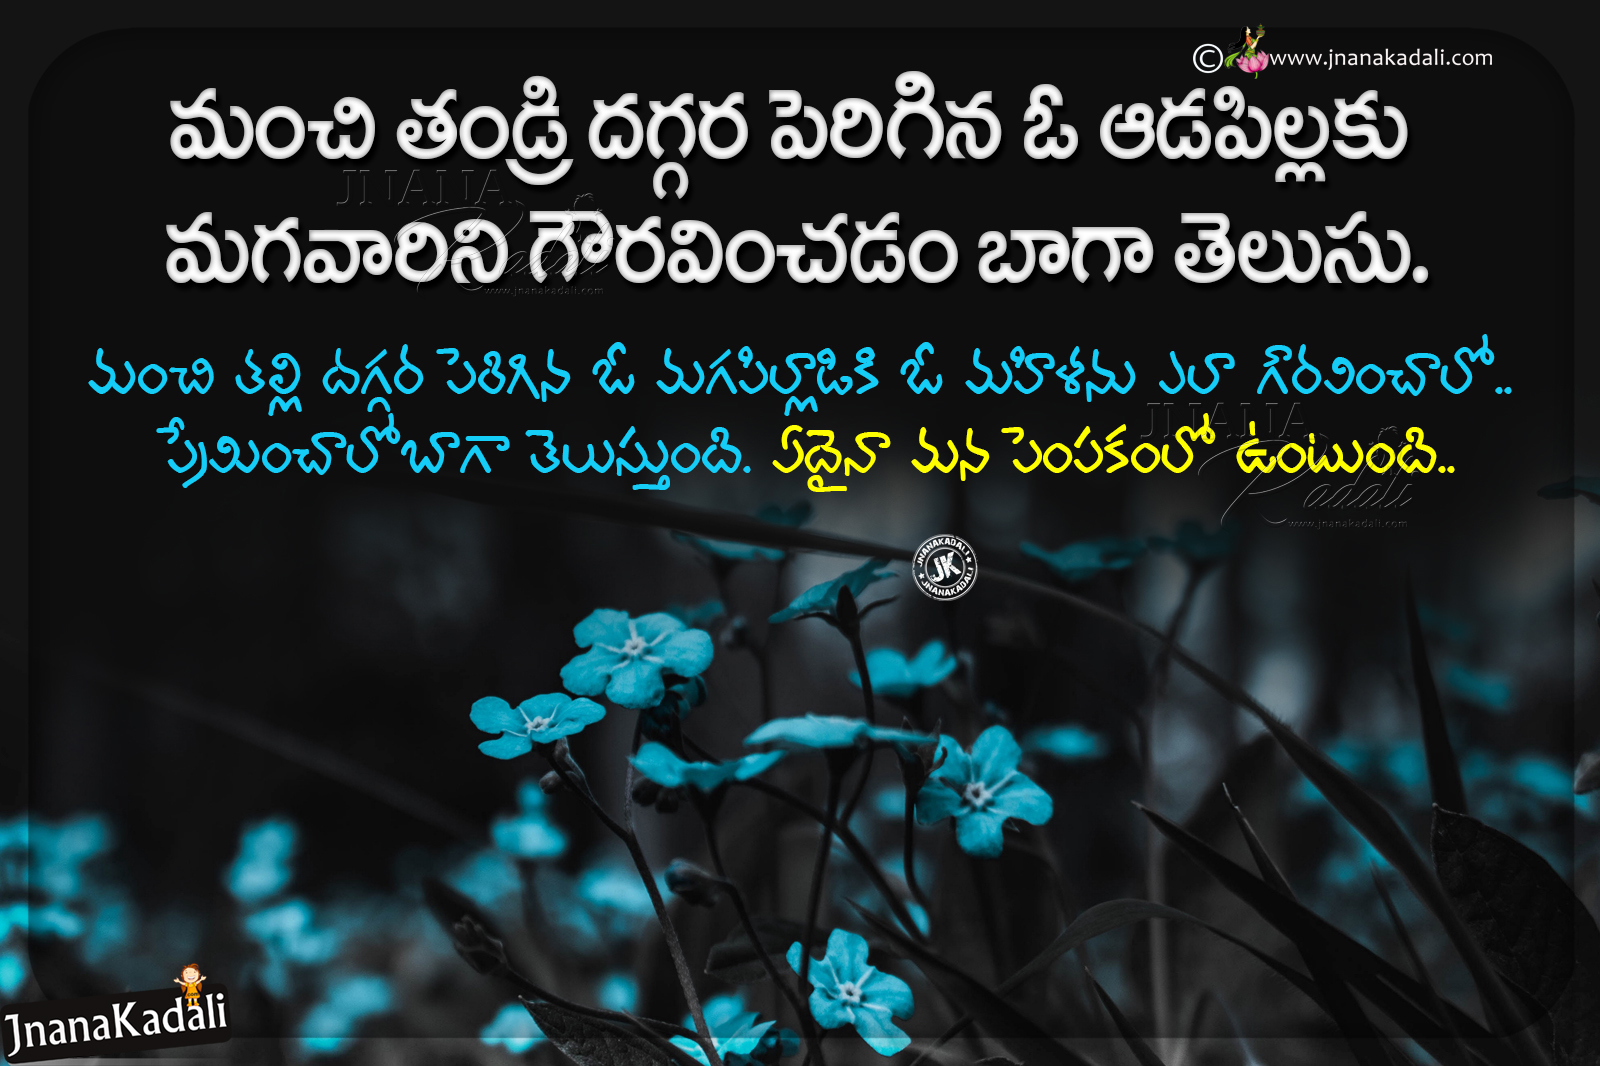 Father And Mother Greatness Quotes In Telugu Parents Greatness Quotes In Telugu Jnana Kadali Com Telugu Quotes English Quotes Hindi Quotes Tamil Quotes Dharmasandehalu